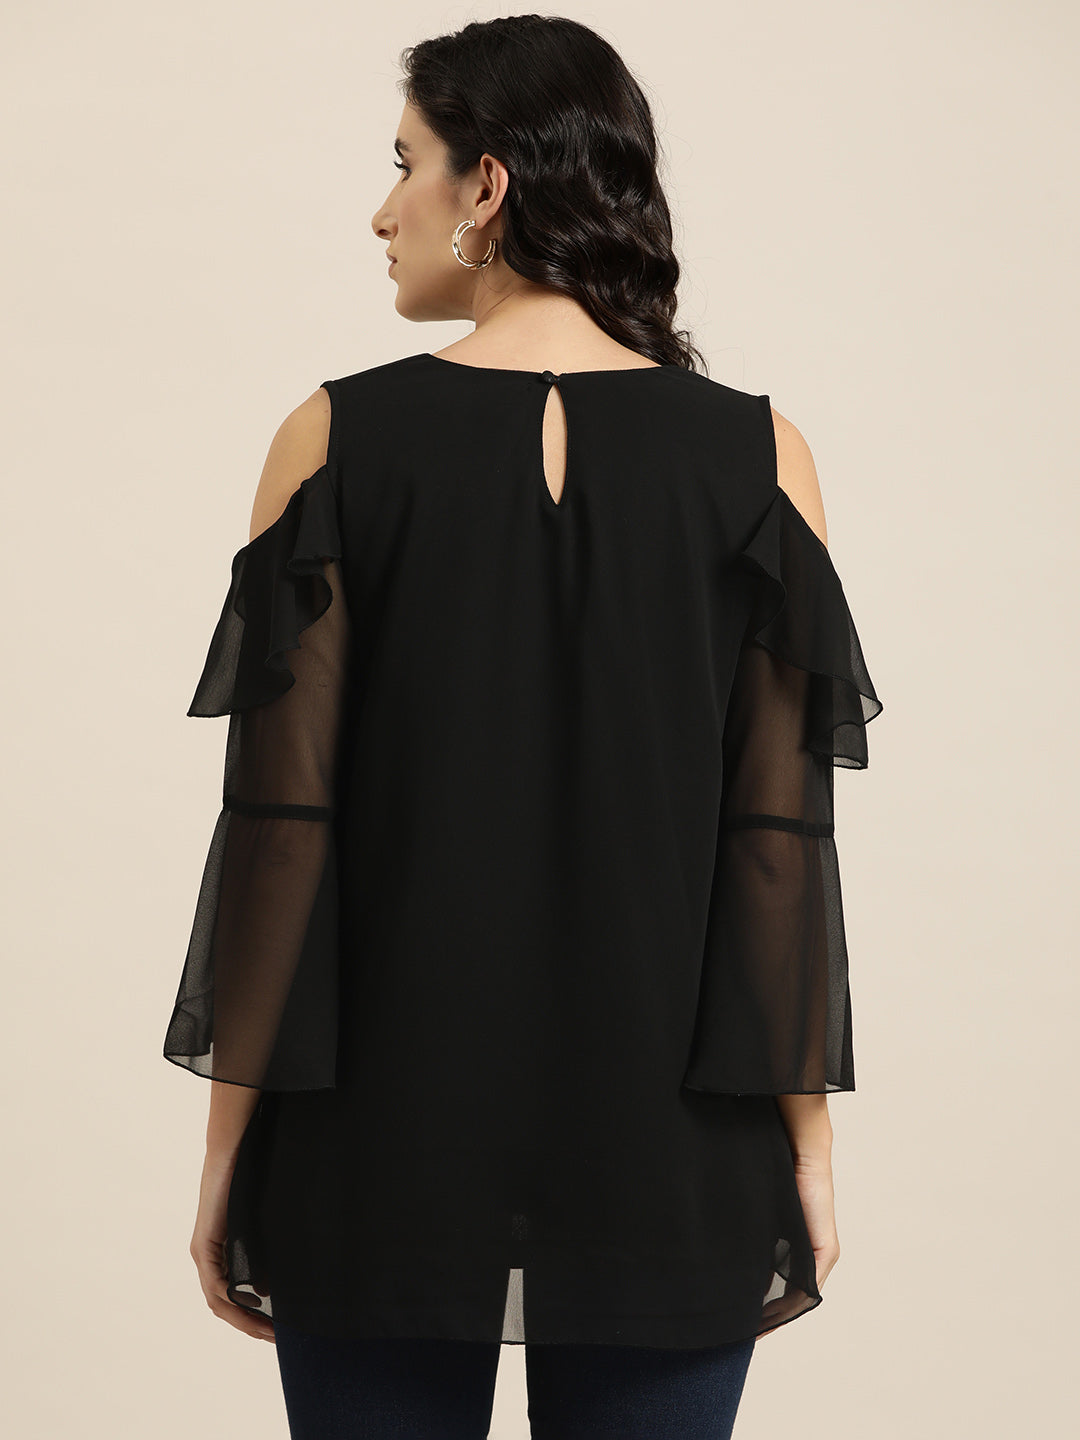 Black solid cold shoulder ruffle top with bell sleeves